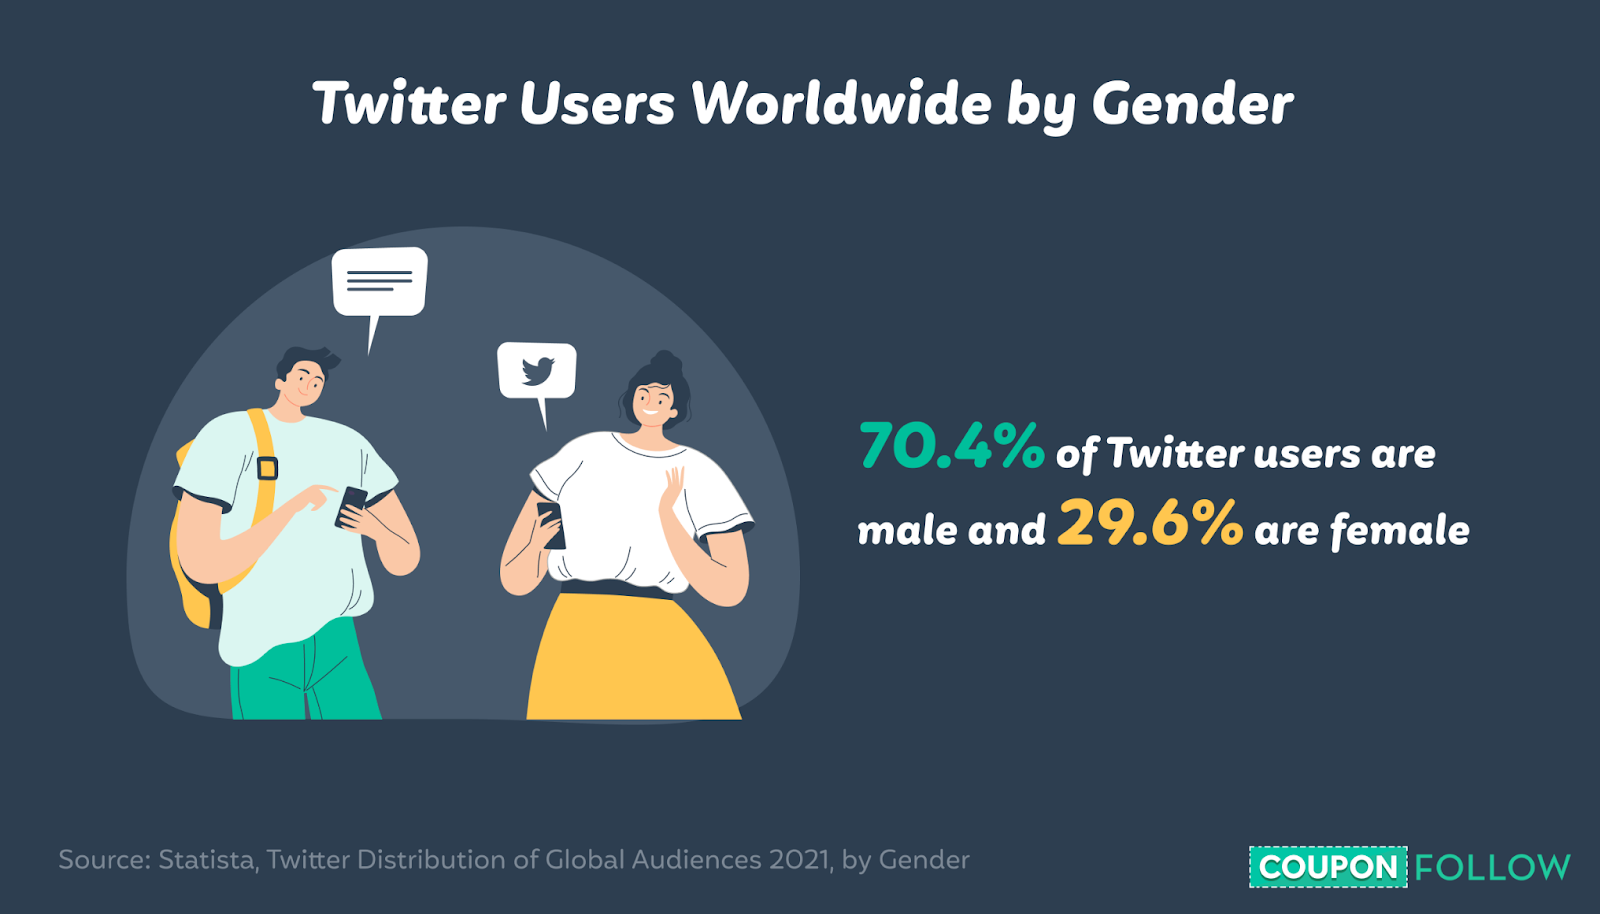 Illustration showing the percentage of Twitter users by gender